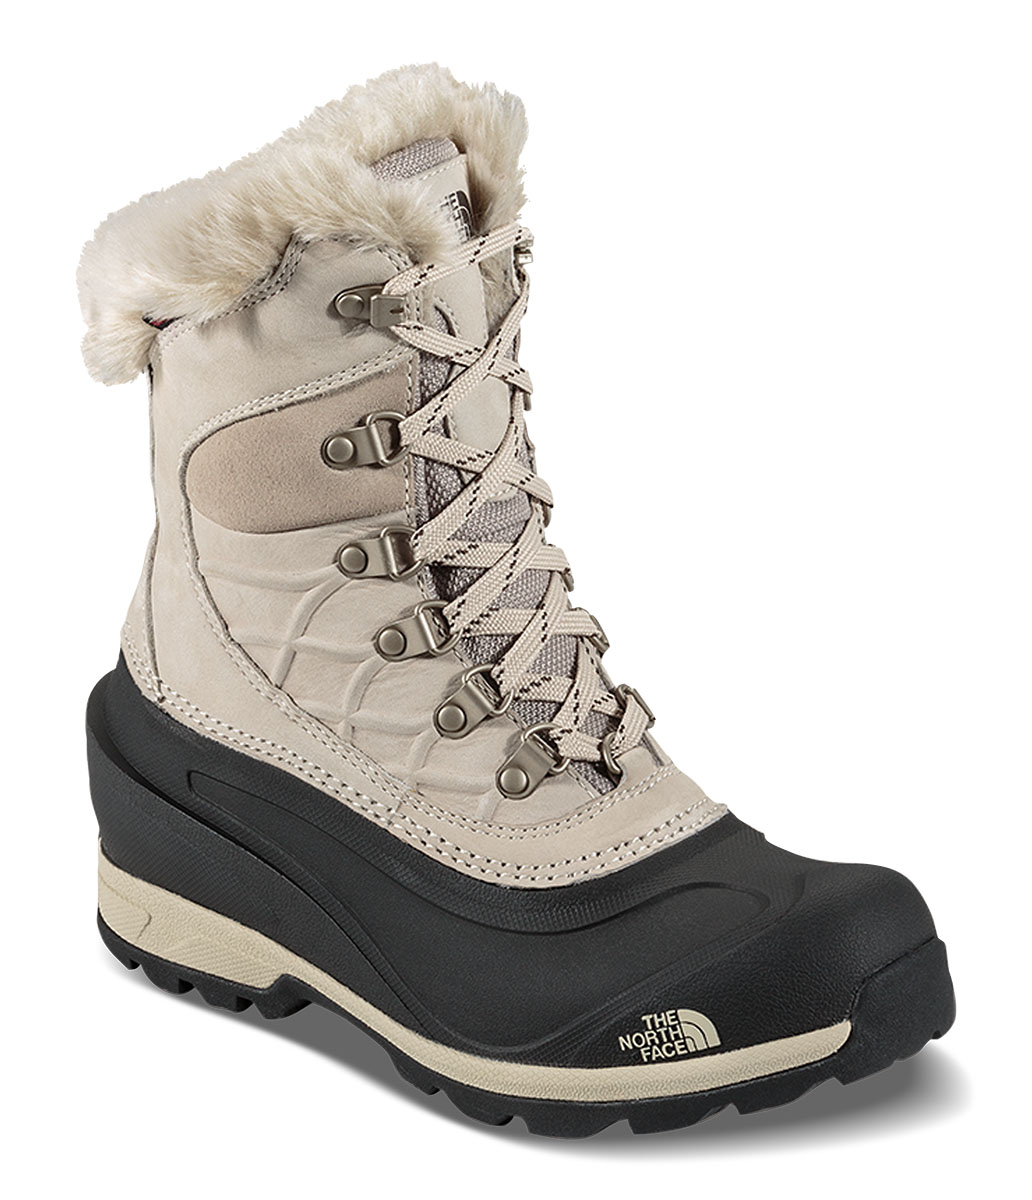 The North Face Women's Chilkat 400 Boot 